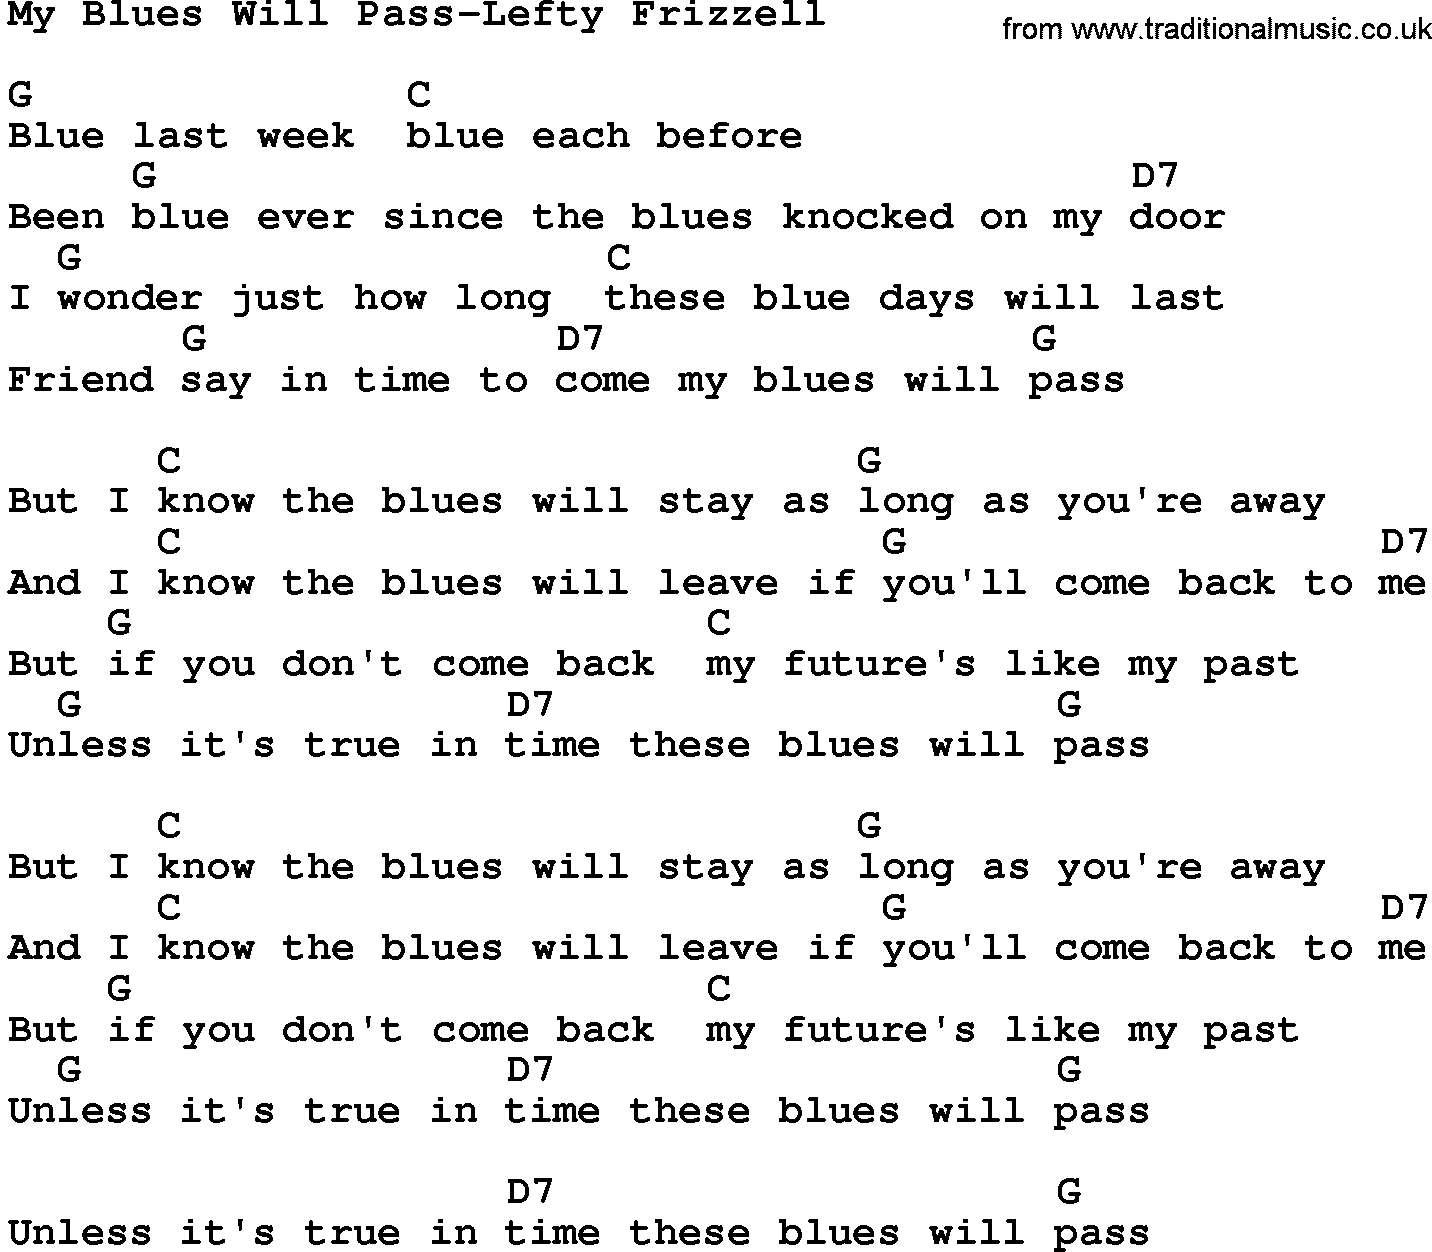 Country music song: My Blues Will Pass-Lefty Frizzell lyrics and chords